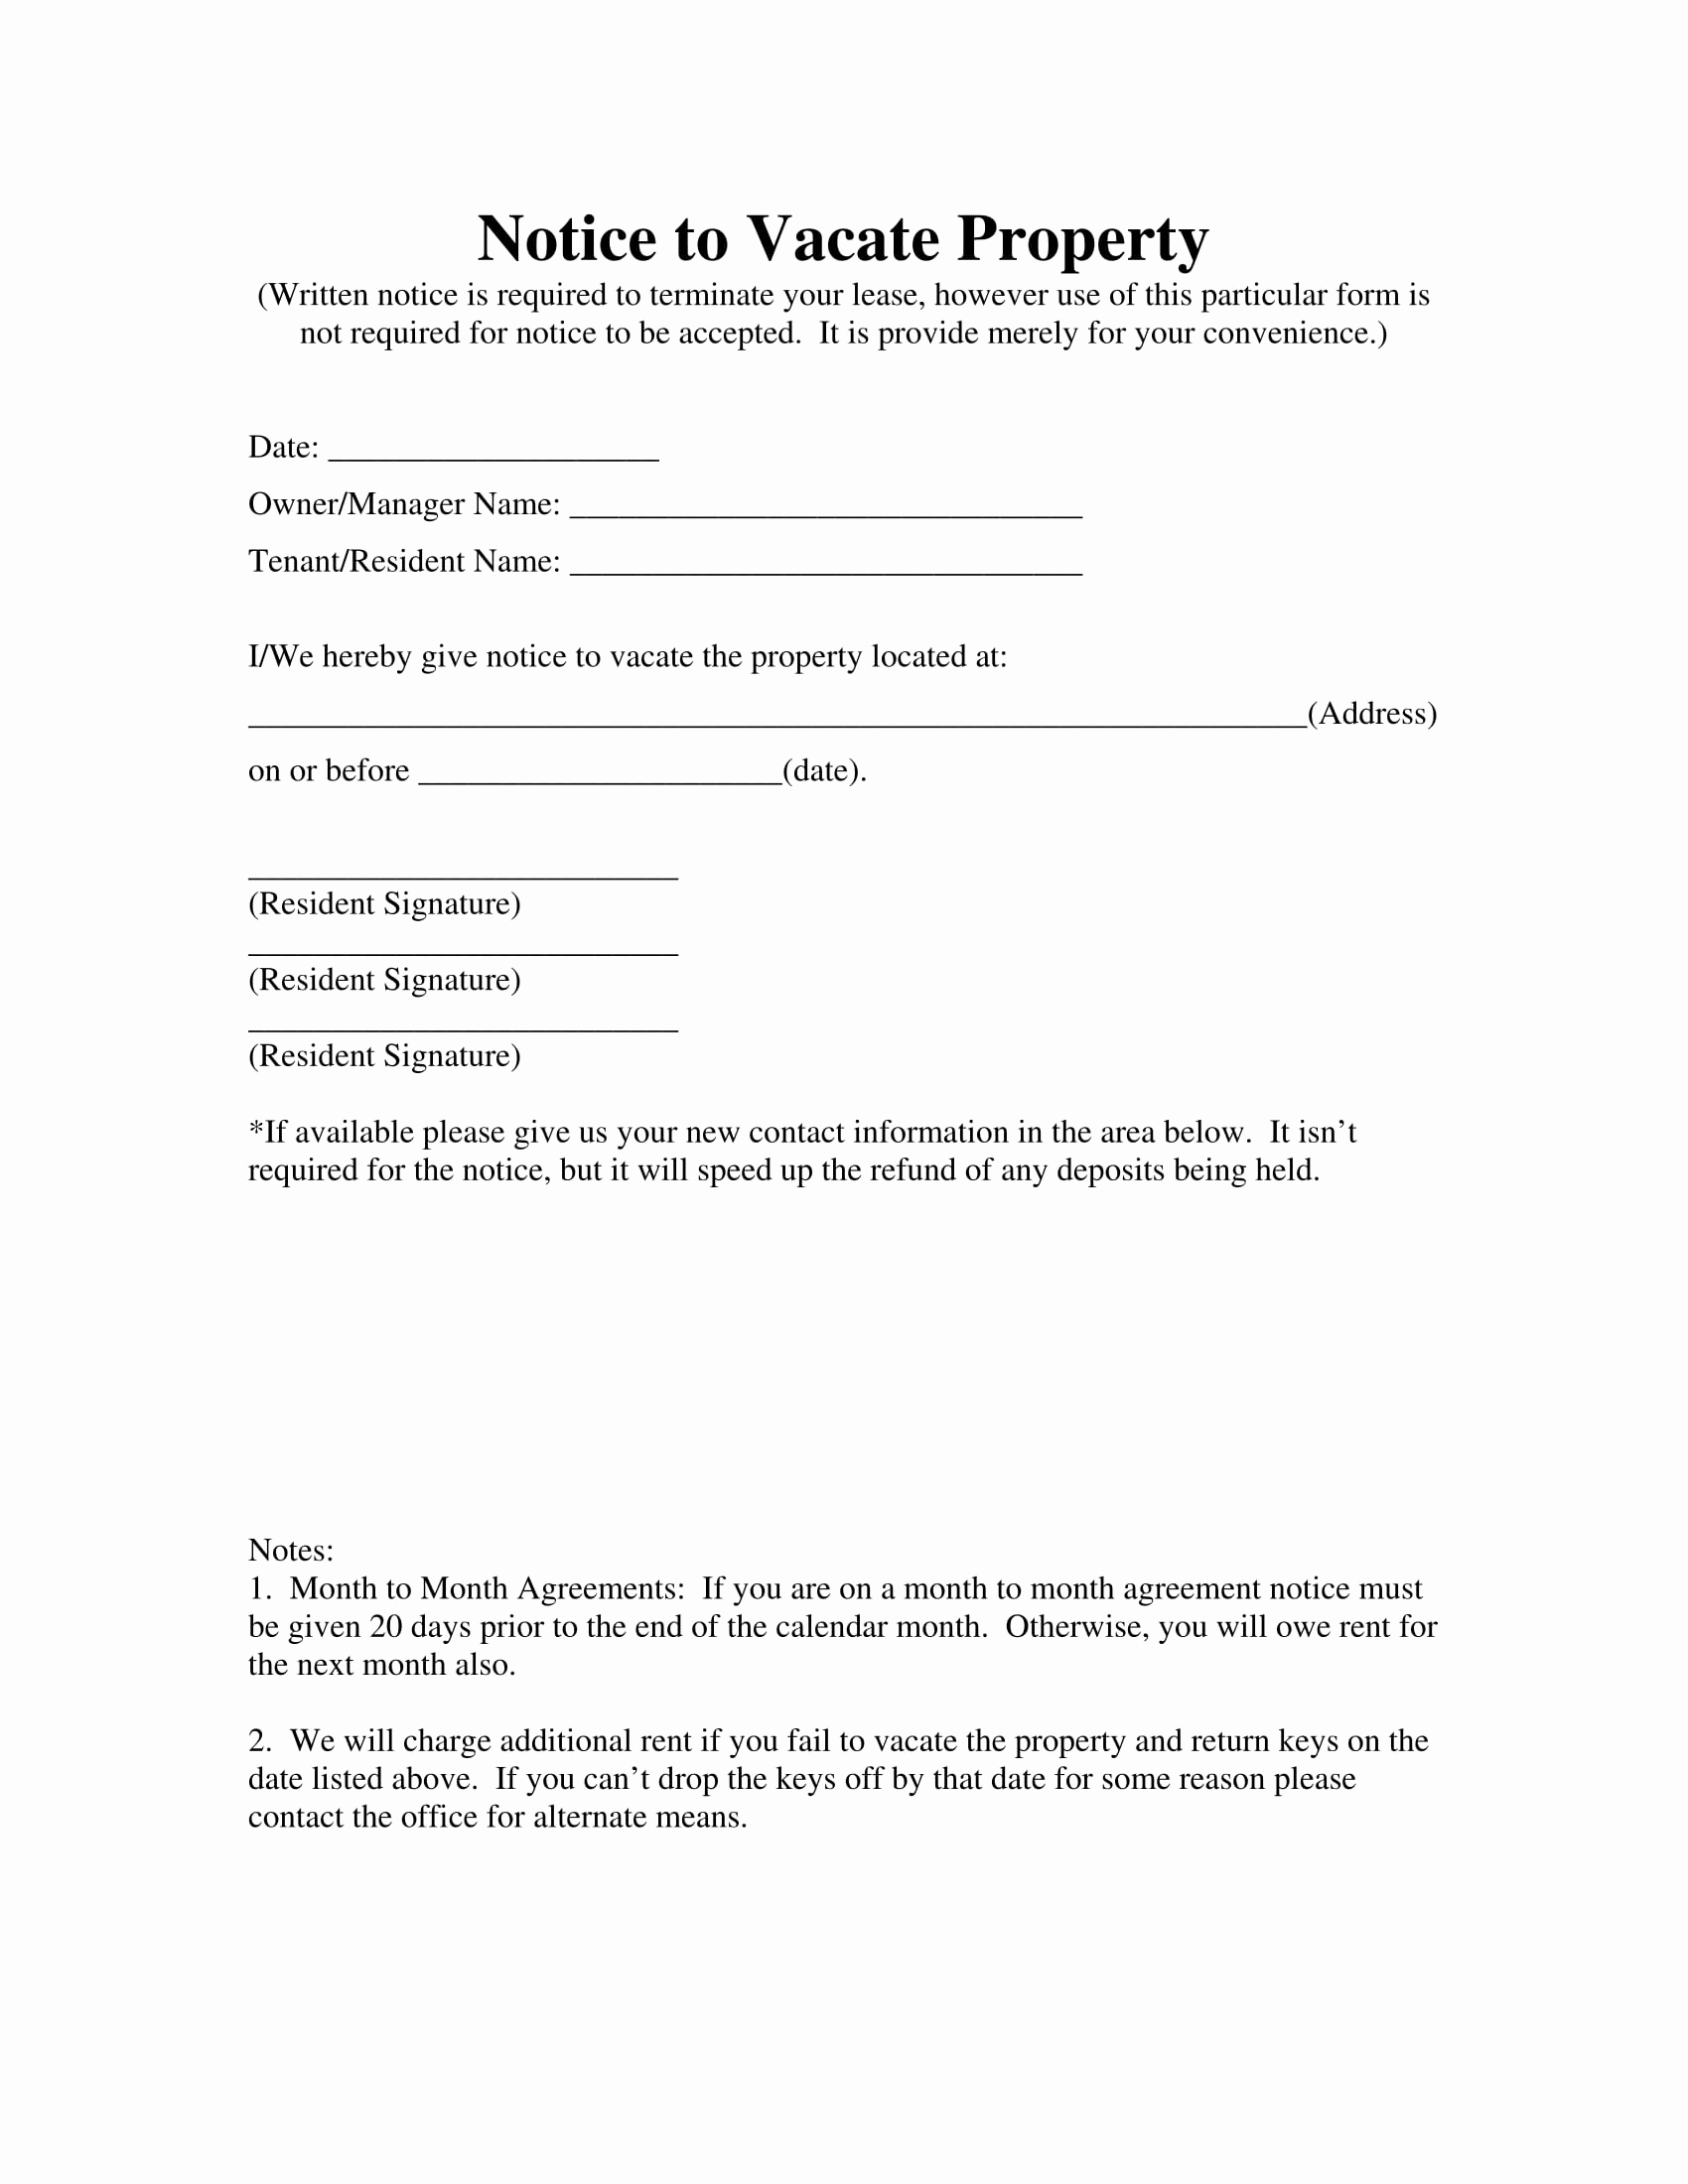 Notice to Quit form Lovely 15 Landlord forms Landlord Agreements Notice forms